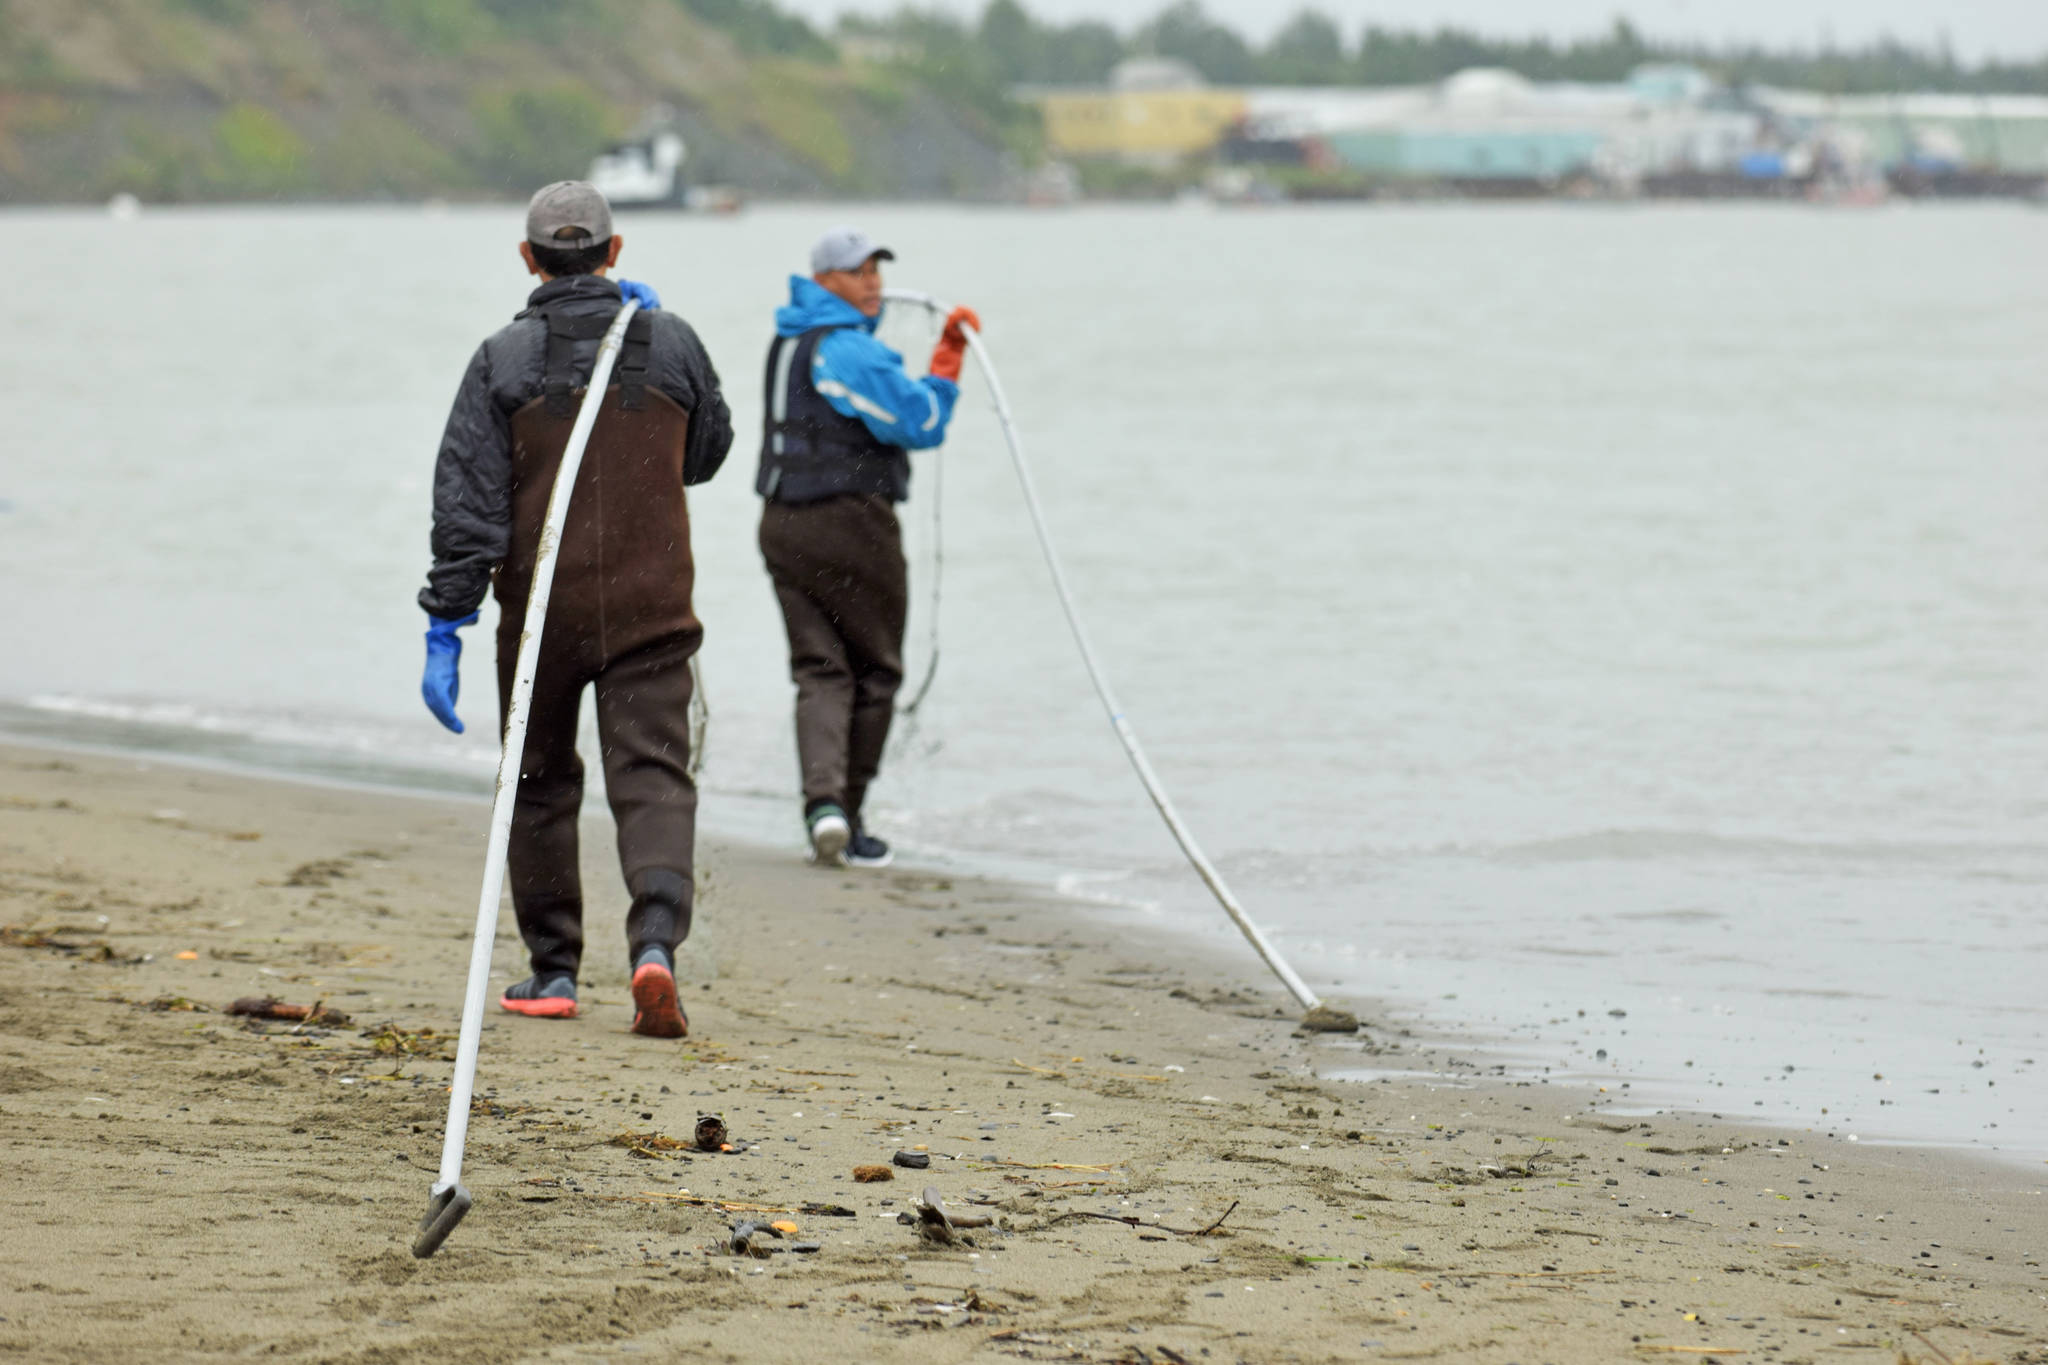 Dipnetters carry their dipnets to the water at Kenai Beach on Tuesday, July 10, 2018 in Kenai, Alaska. Tuesday marked the opening of the three-week dipnetting season, during which Alaska residents can harvest salmon and flounder for personal use. (Photo by Erin Thompson/Peninsula Clarion)